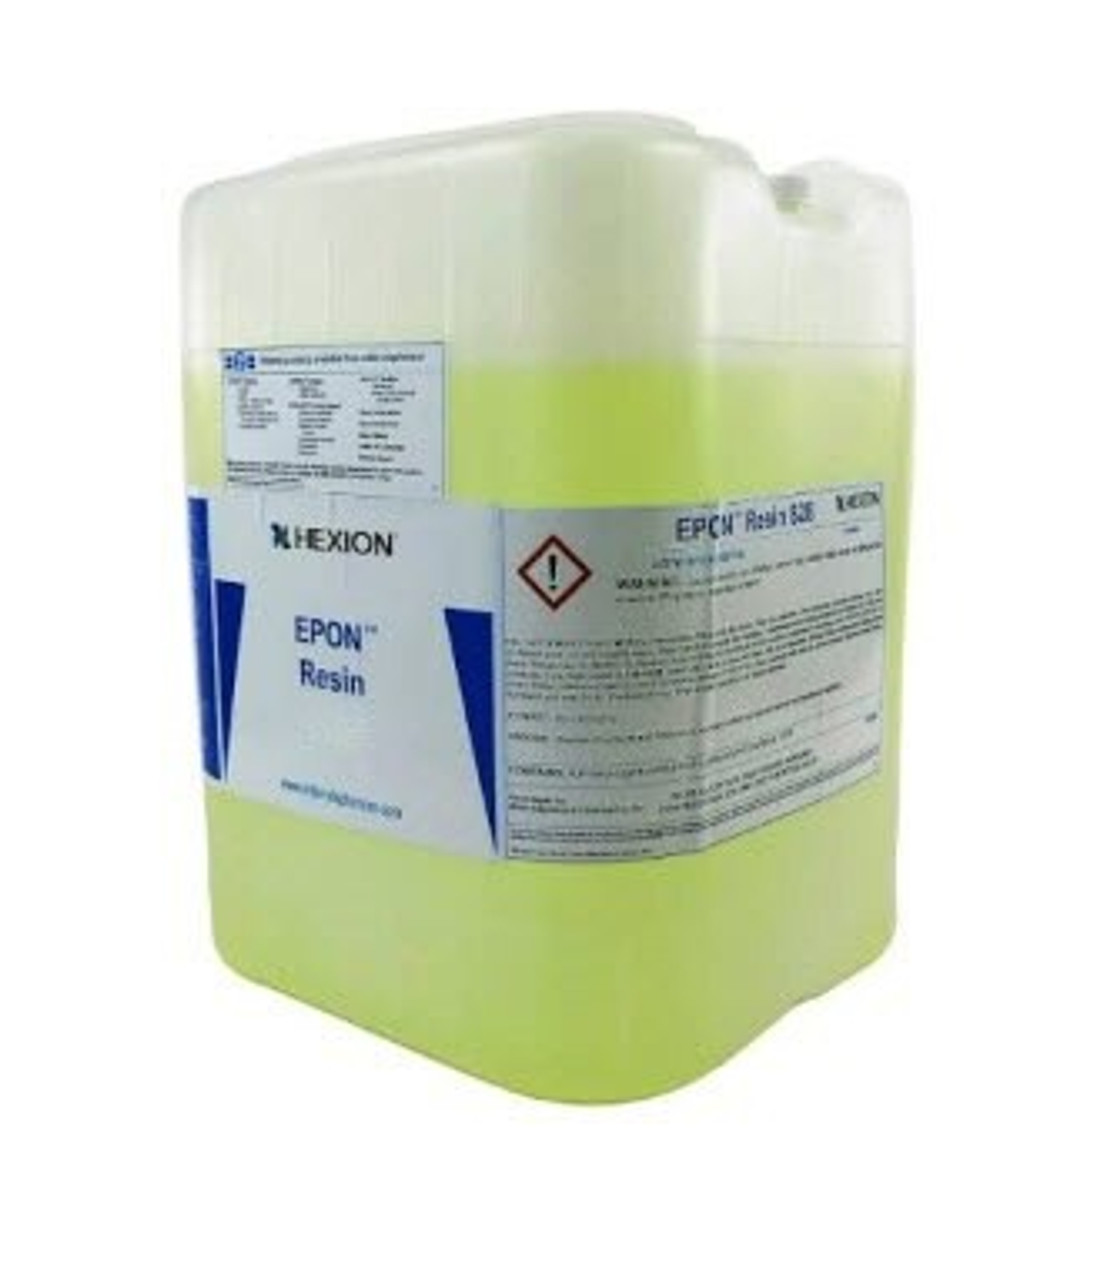 Hexion EPON 825 Clear Epoxy Resin - Gallon Jug at